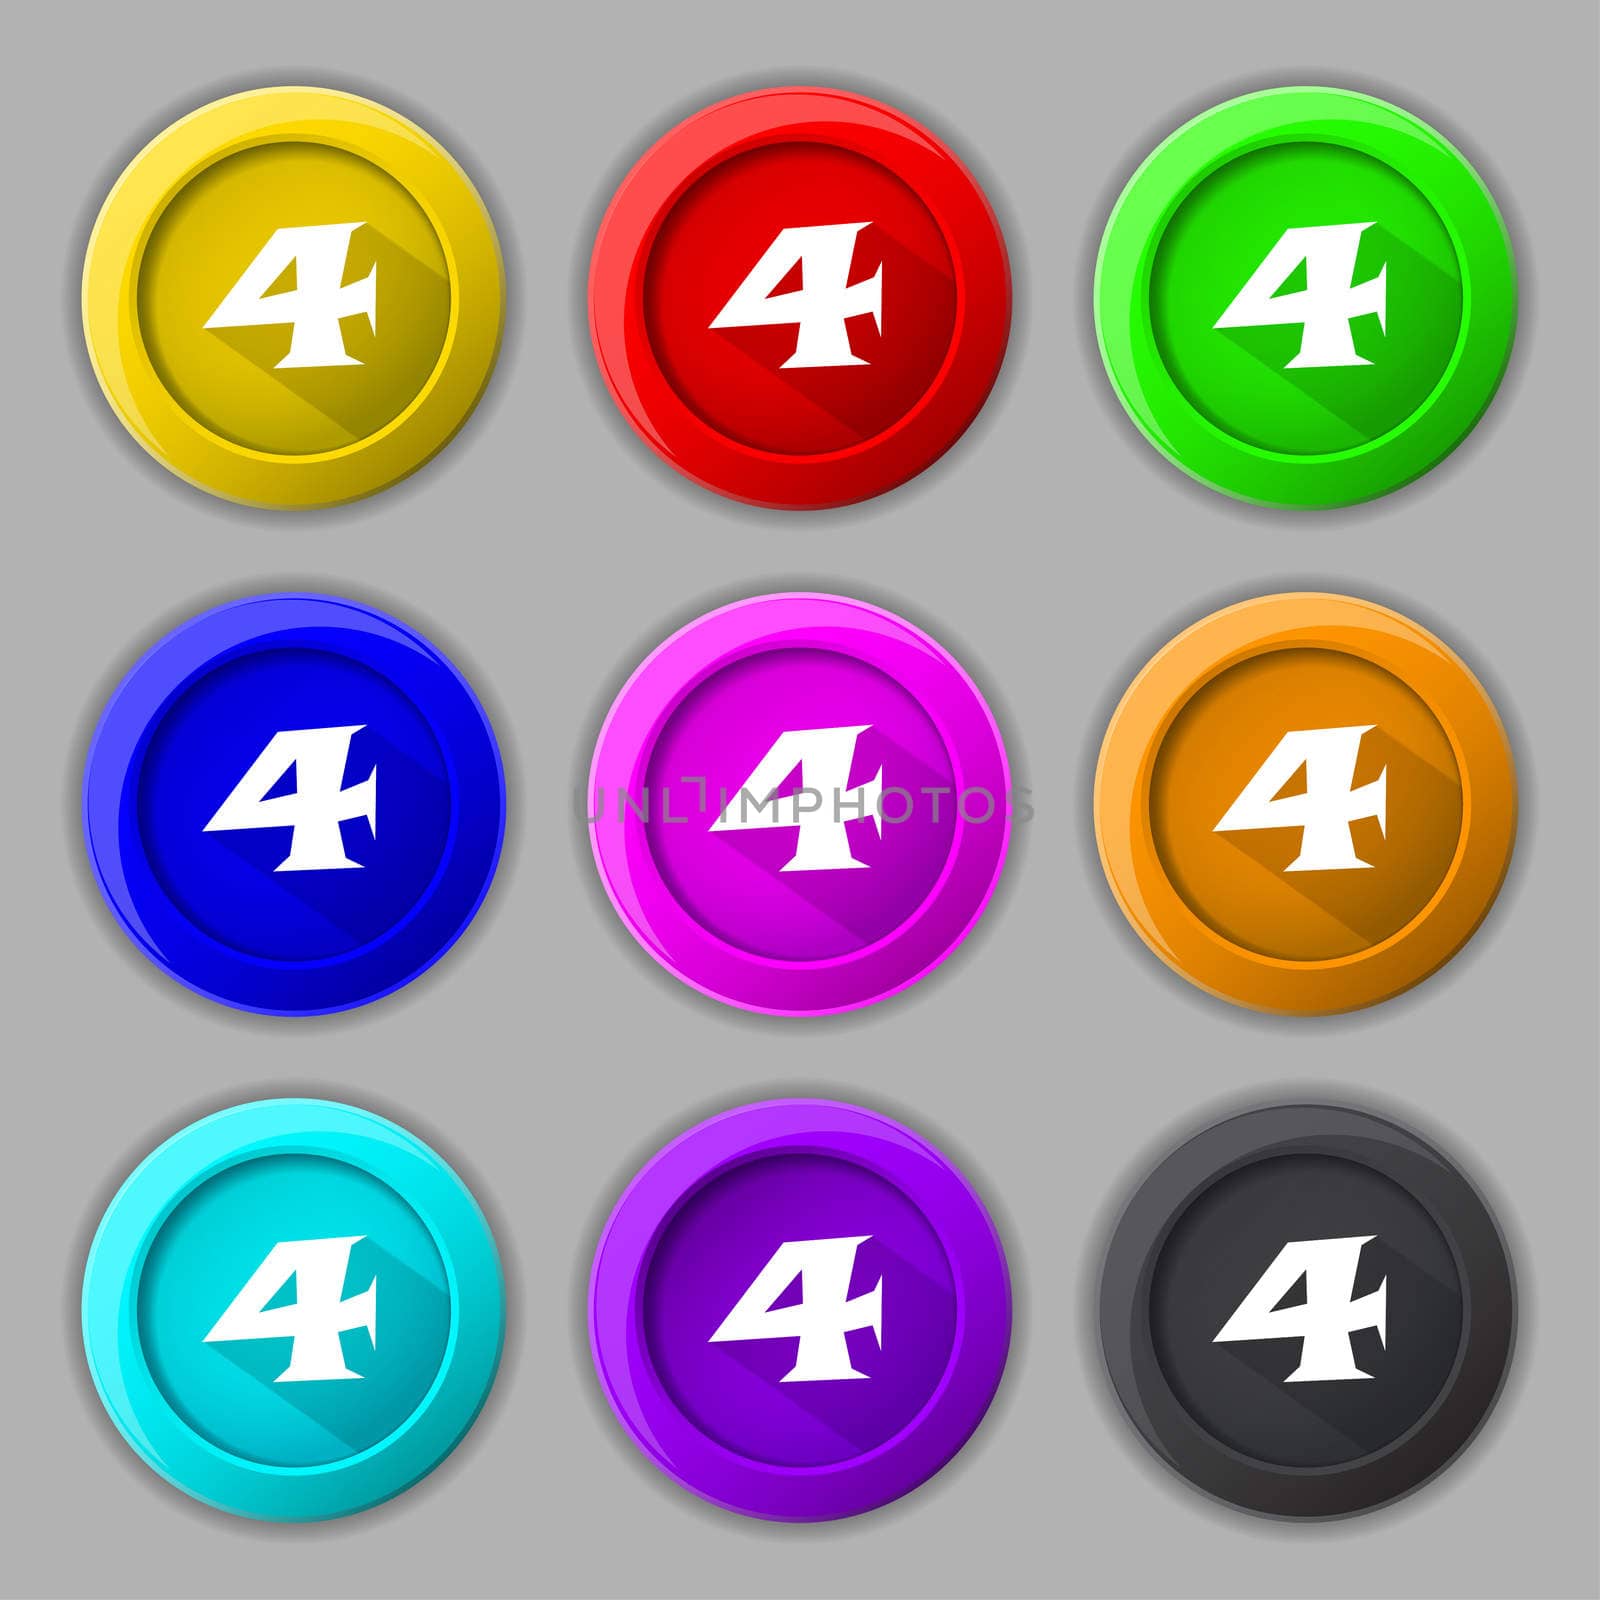 number four icon sign. Set of coloured buttons. illustration